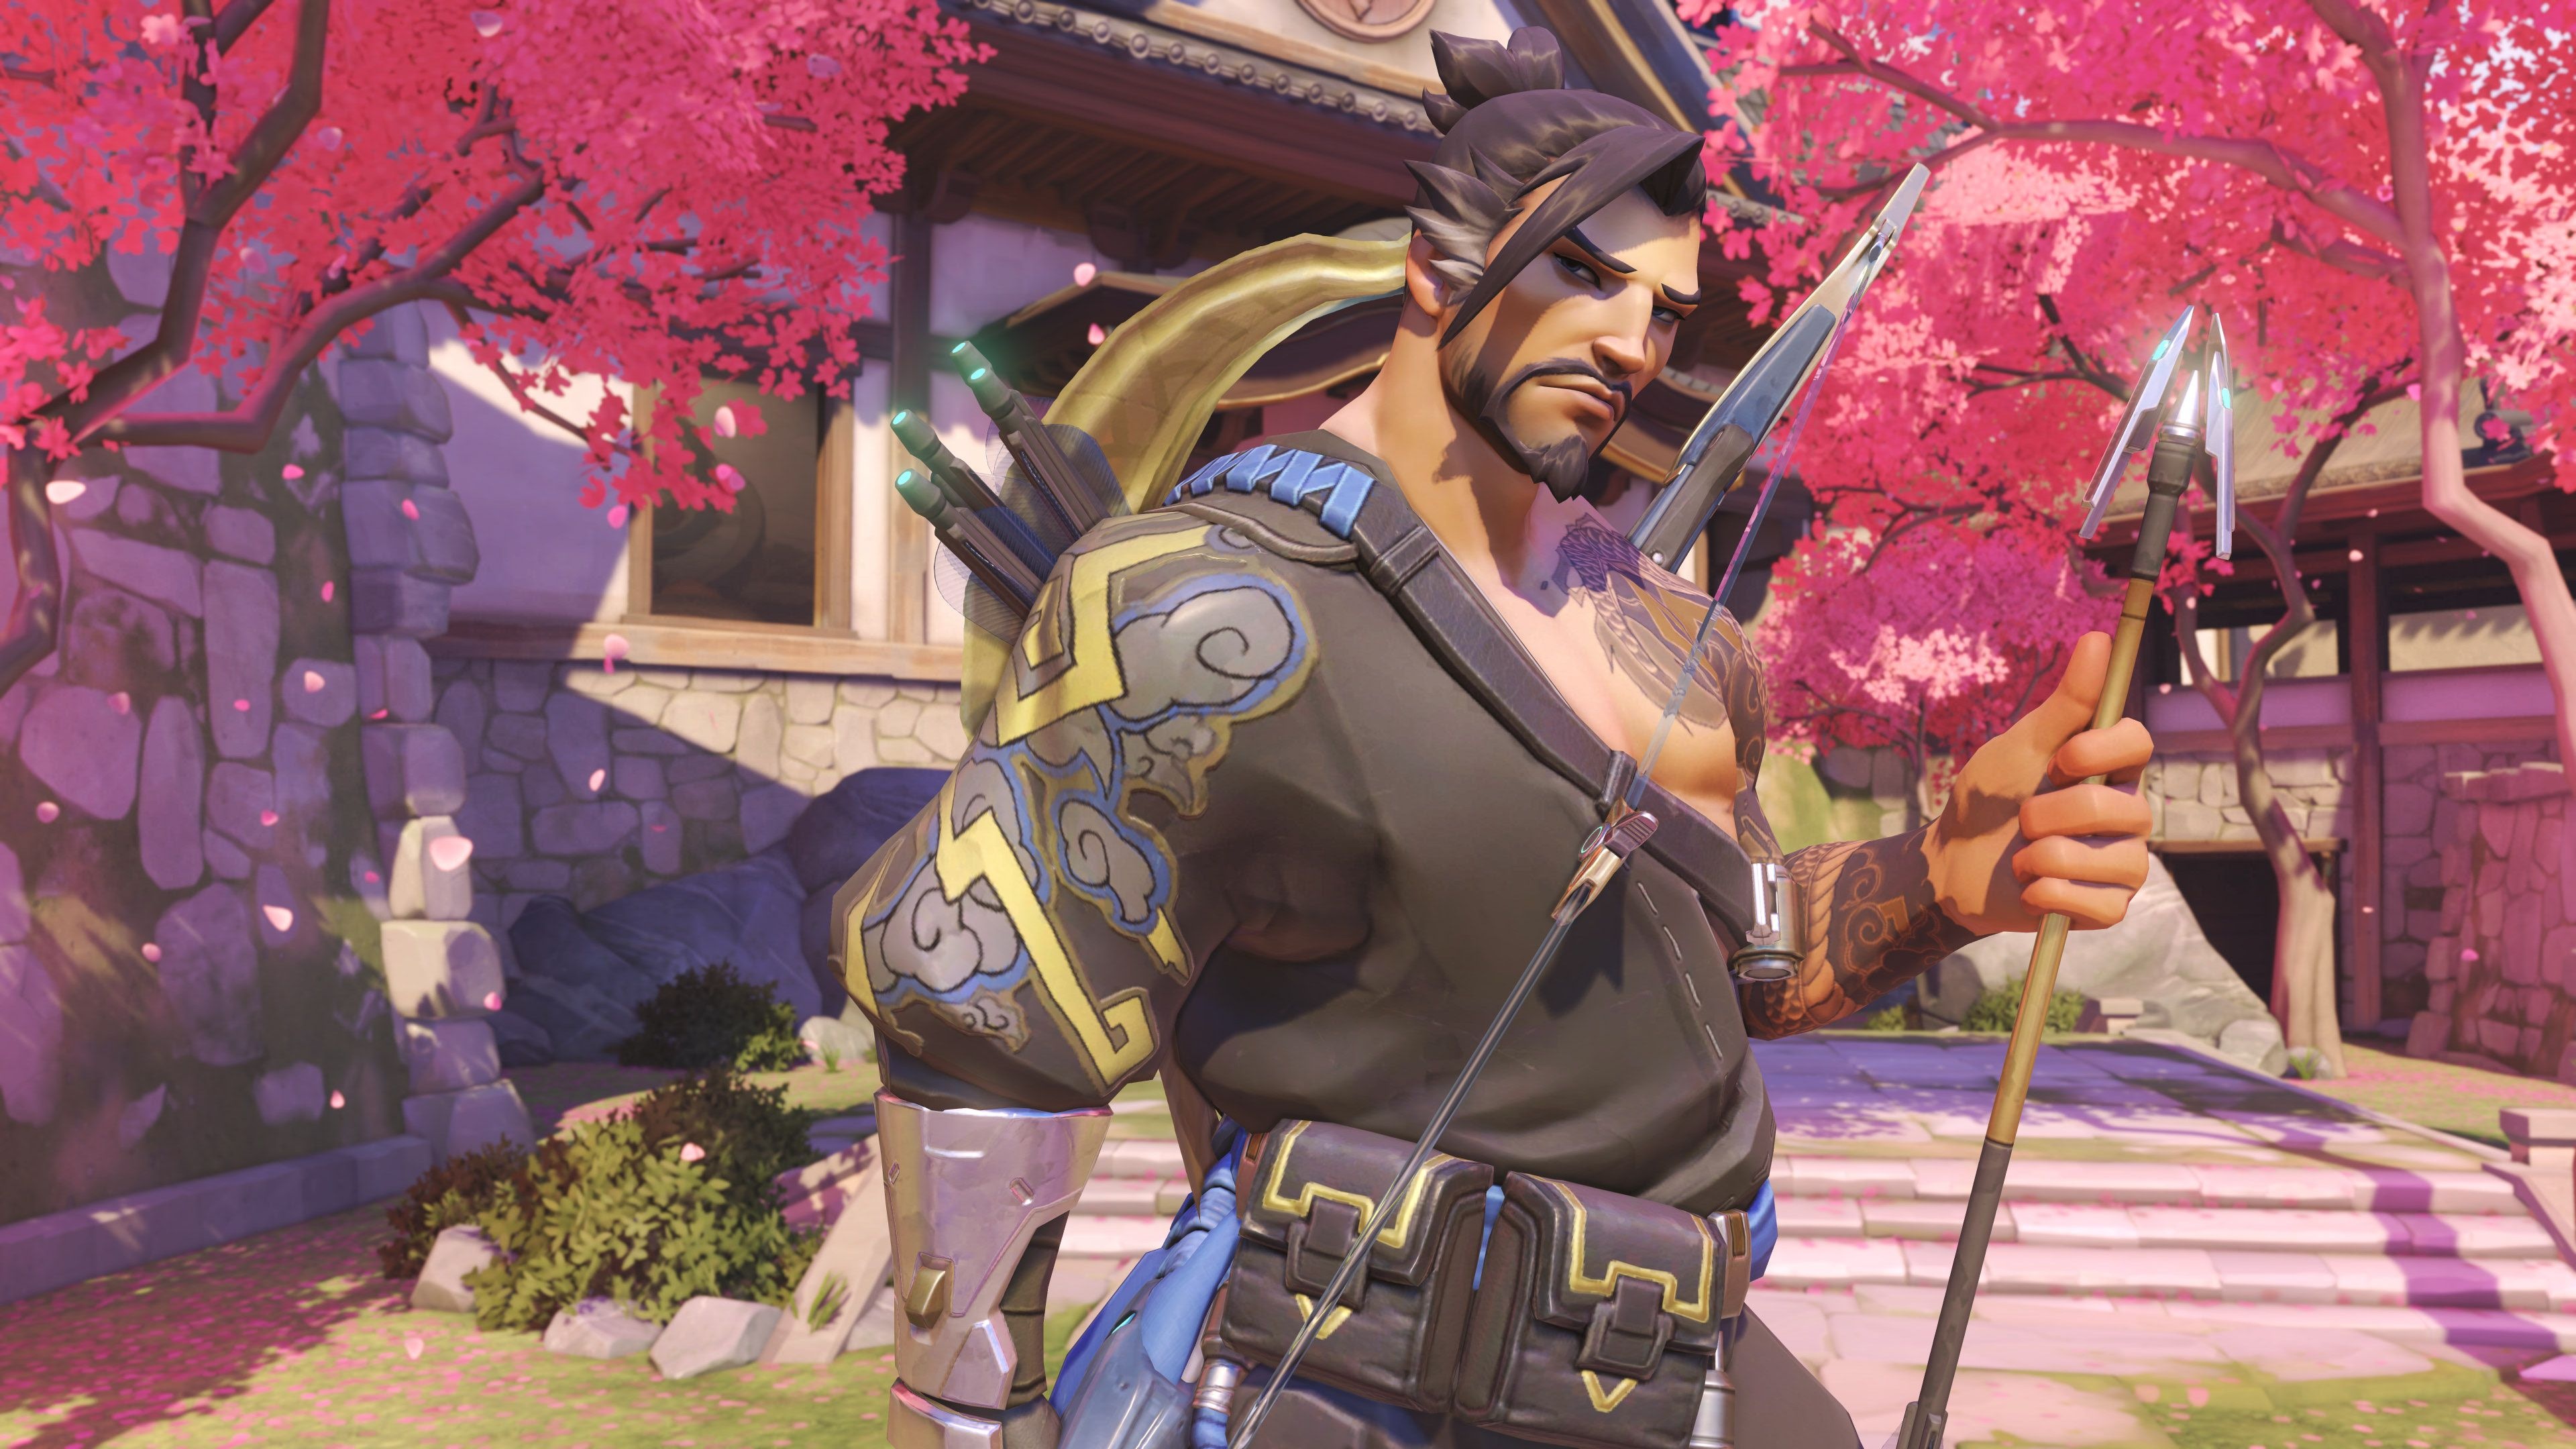 Hanzo, Gaming wallpapers, Overwatch bow, High-definition graphics, 3840x2160 4K Desktop